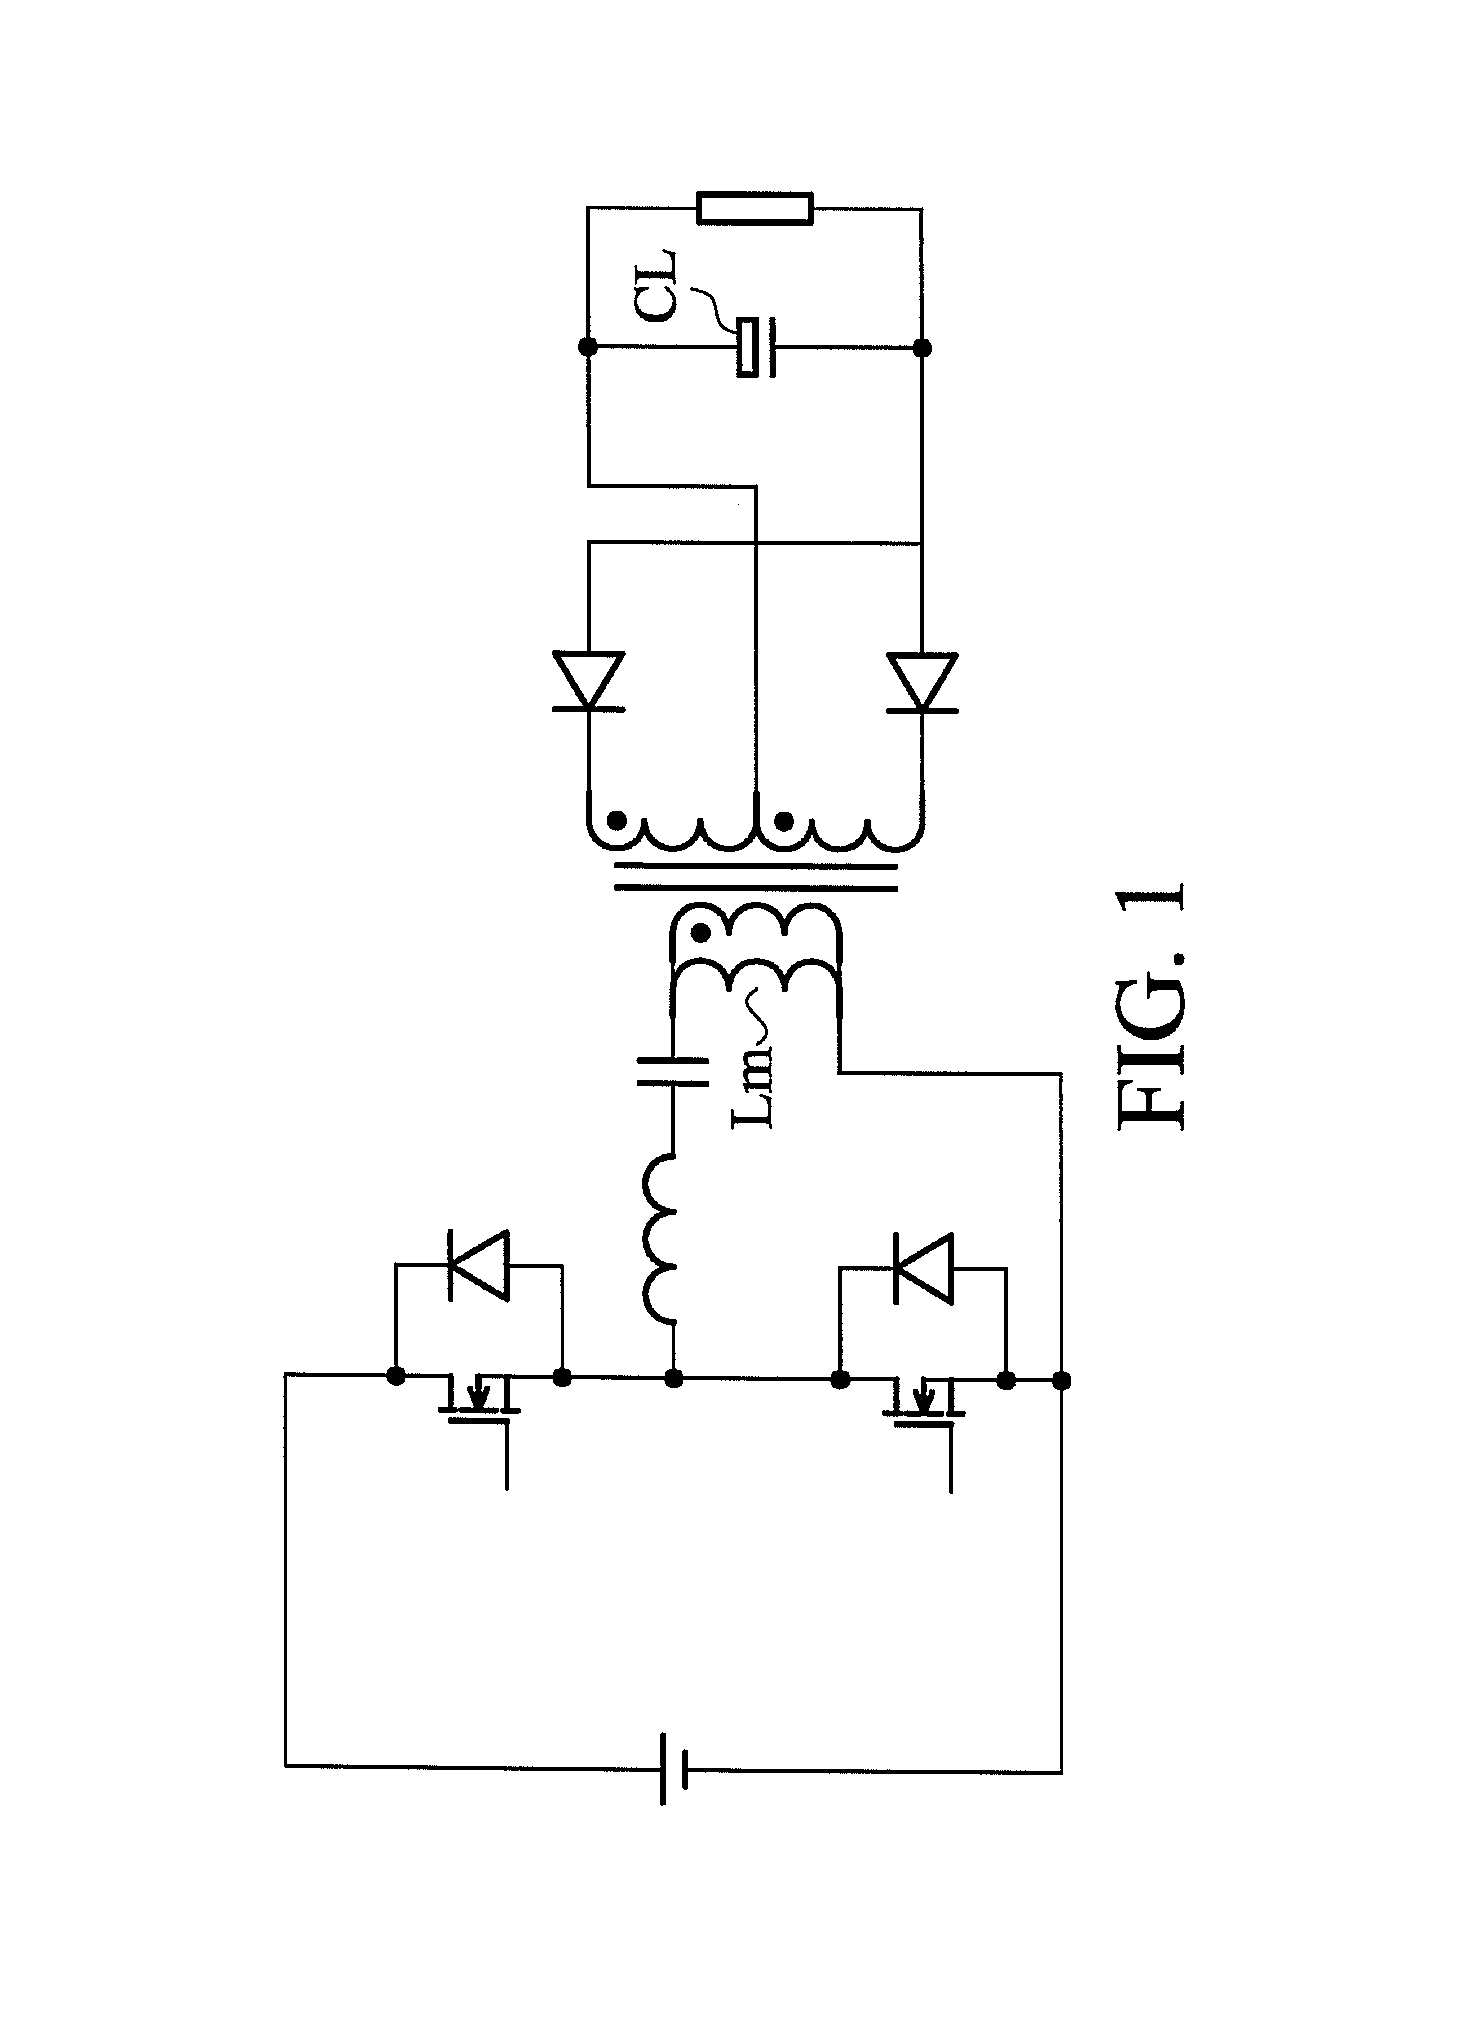 Resonant conversion system with over-current protection processes